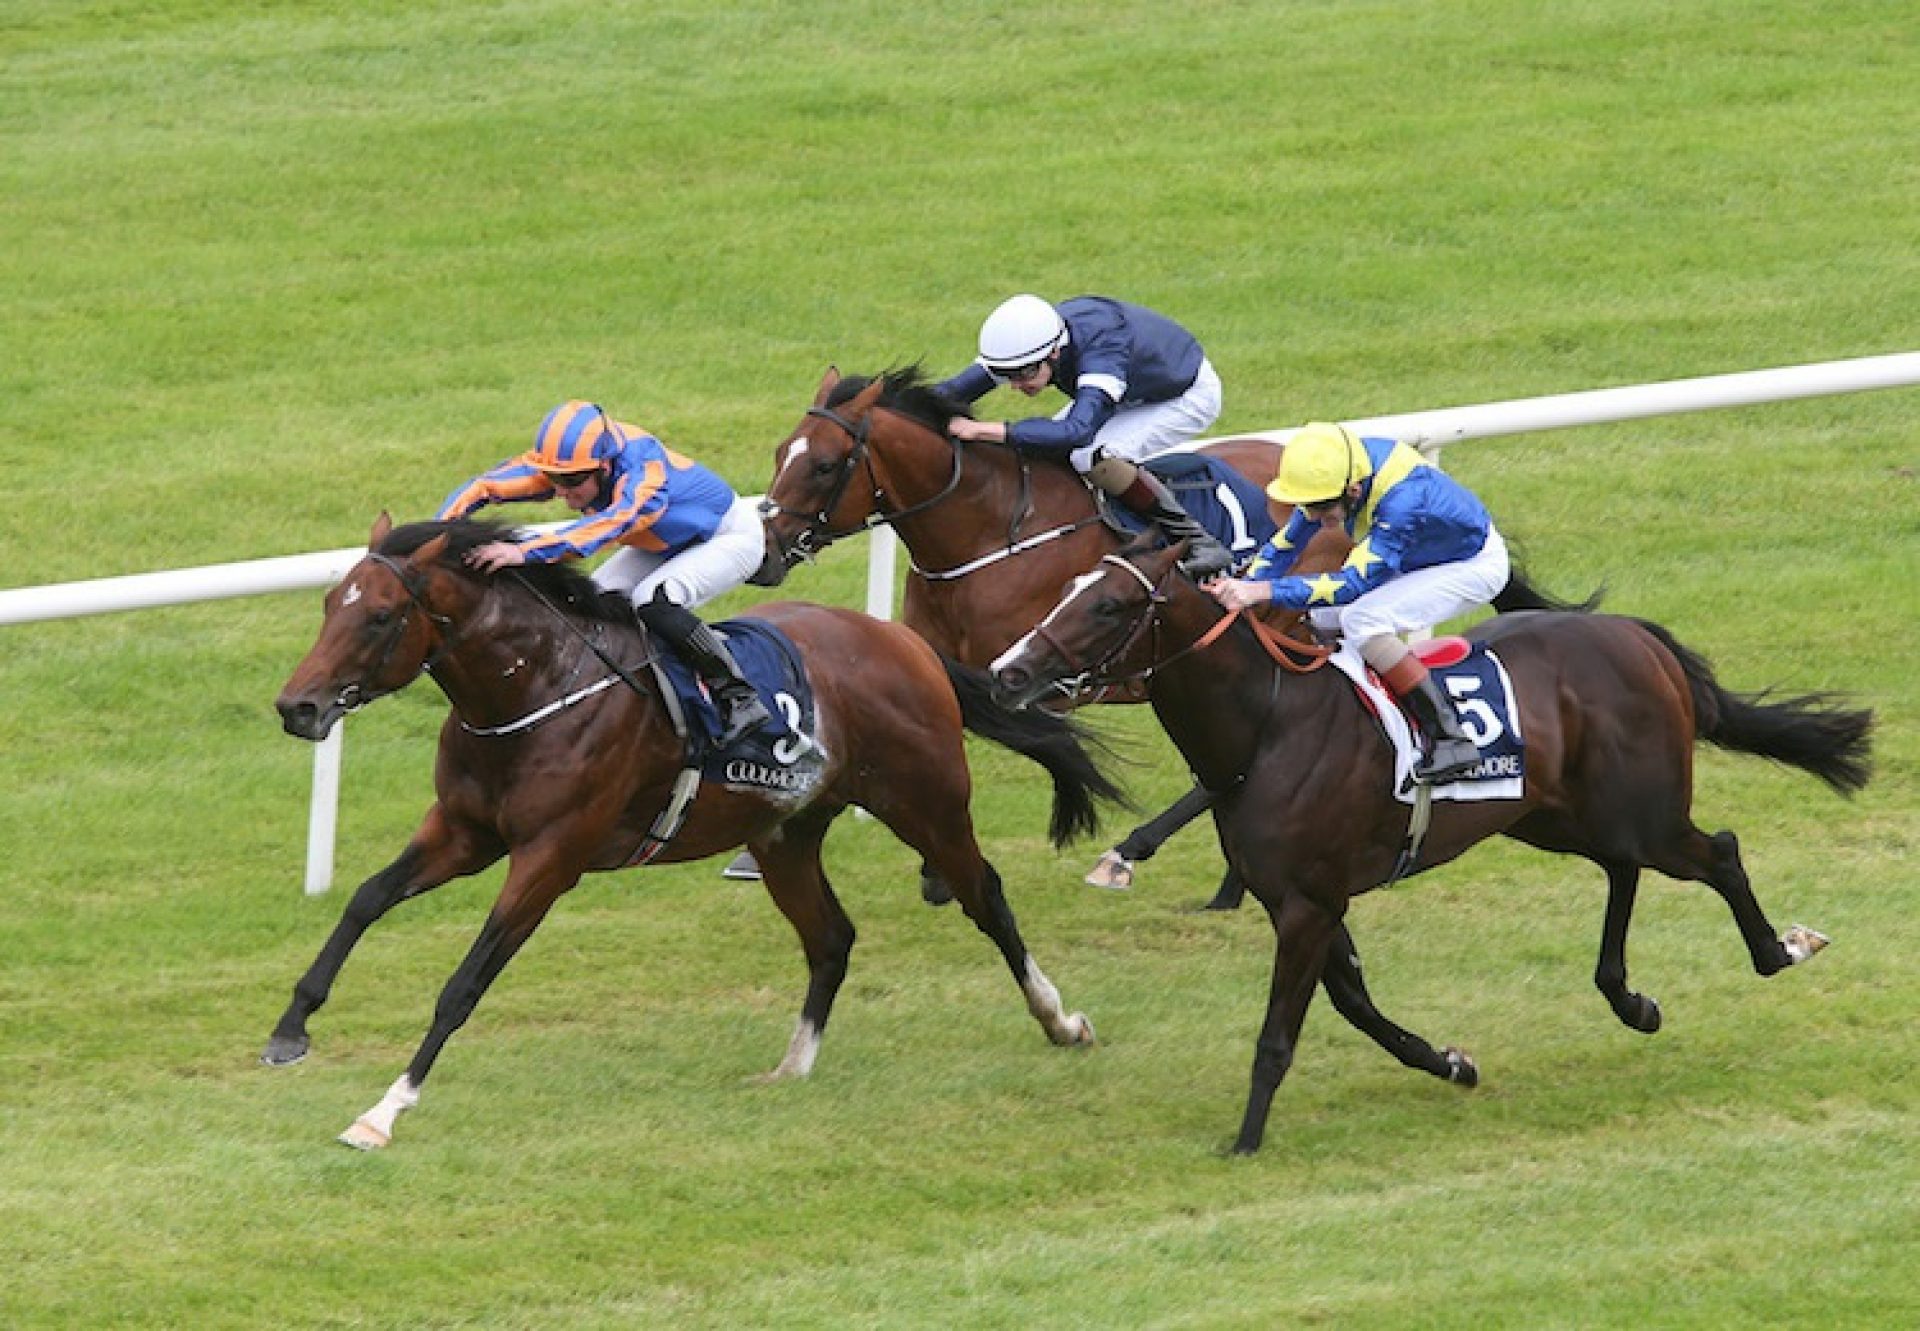 Churchill (Galileo) winning the G3 Tyros Stakes at Leopardstown